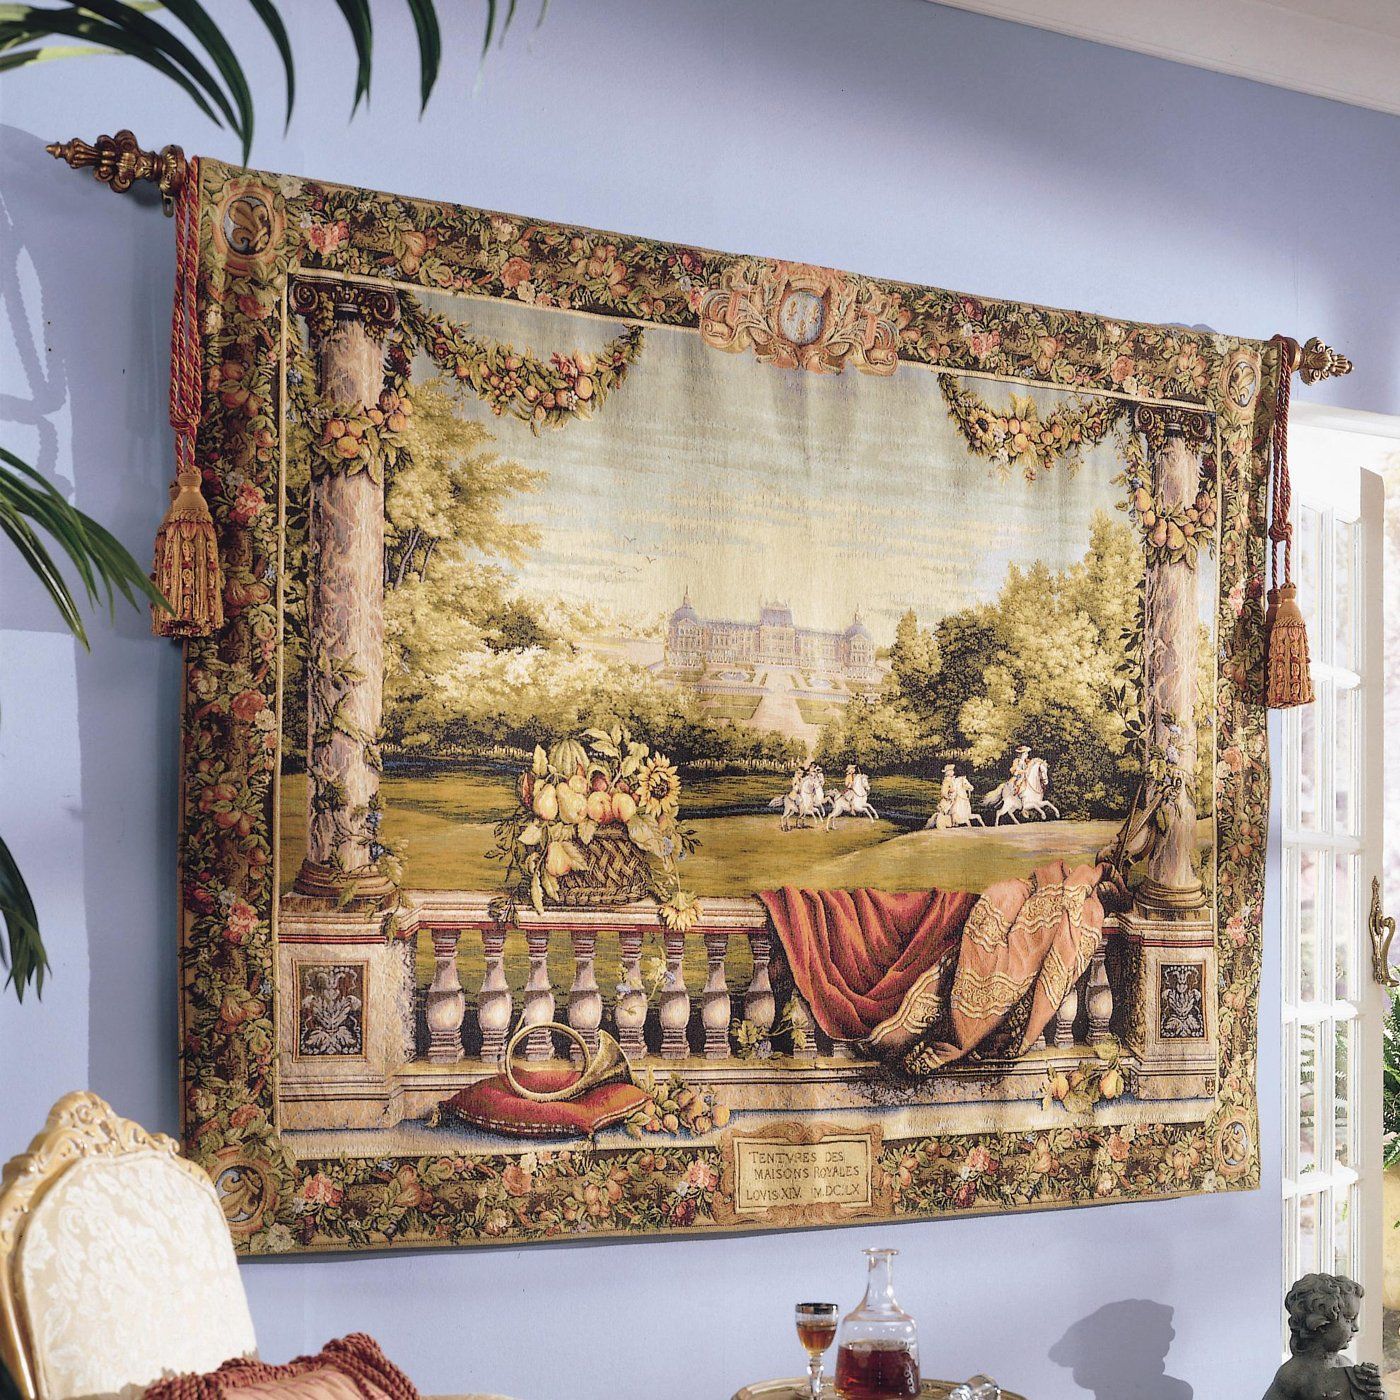 Pinritsa On Decor I Desire | Wall Tapestry, Tapestry Pertaining To Newest Blended Fabric Chateau Bellevue European Tapestries (View 3 of 20)